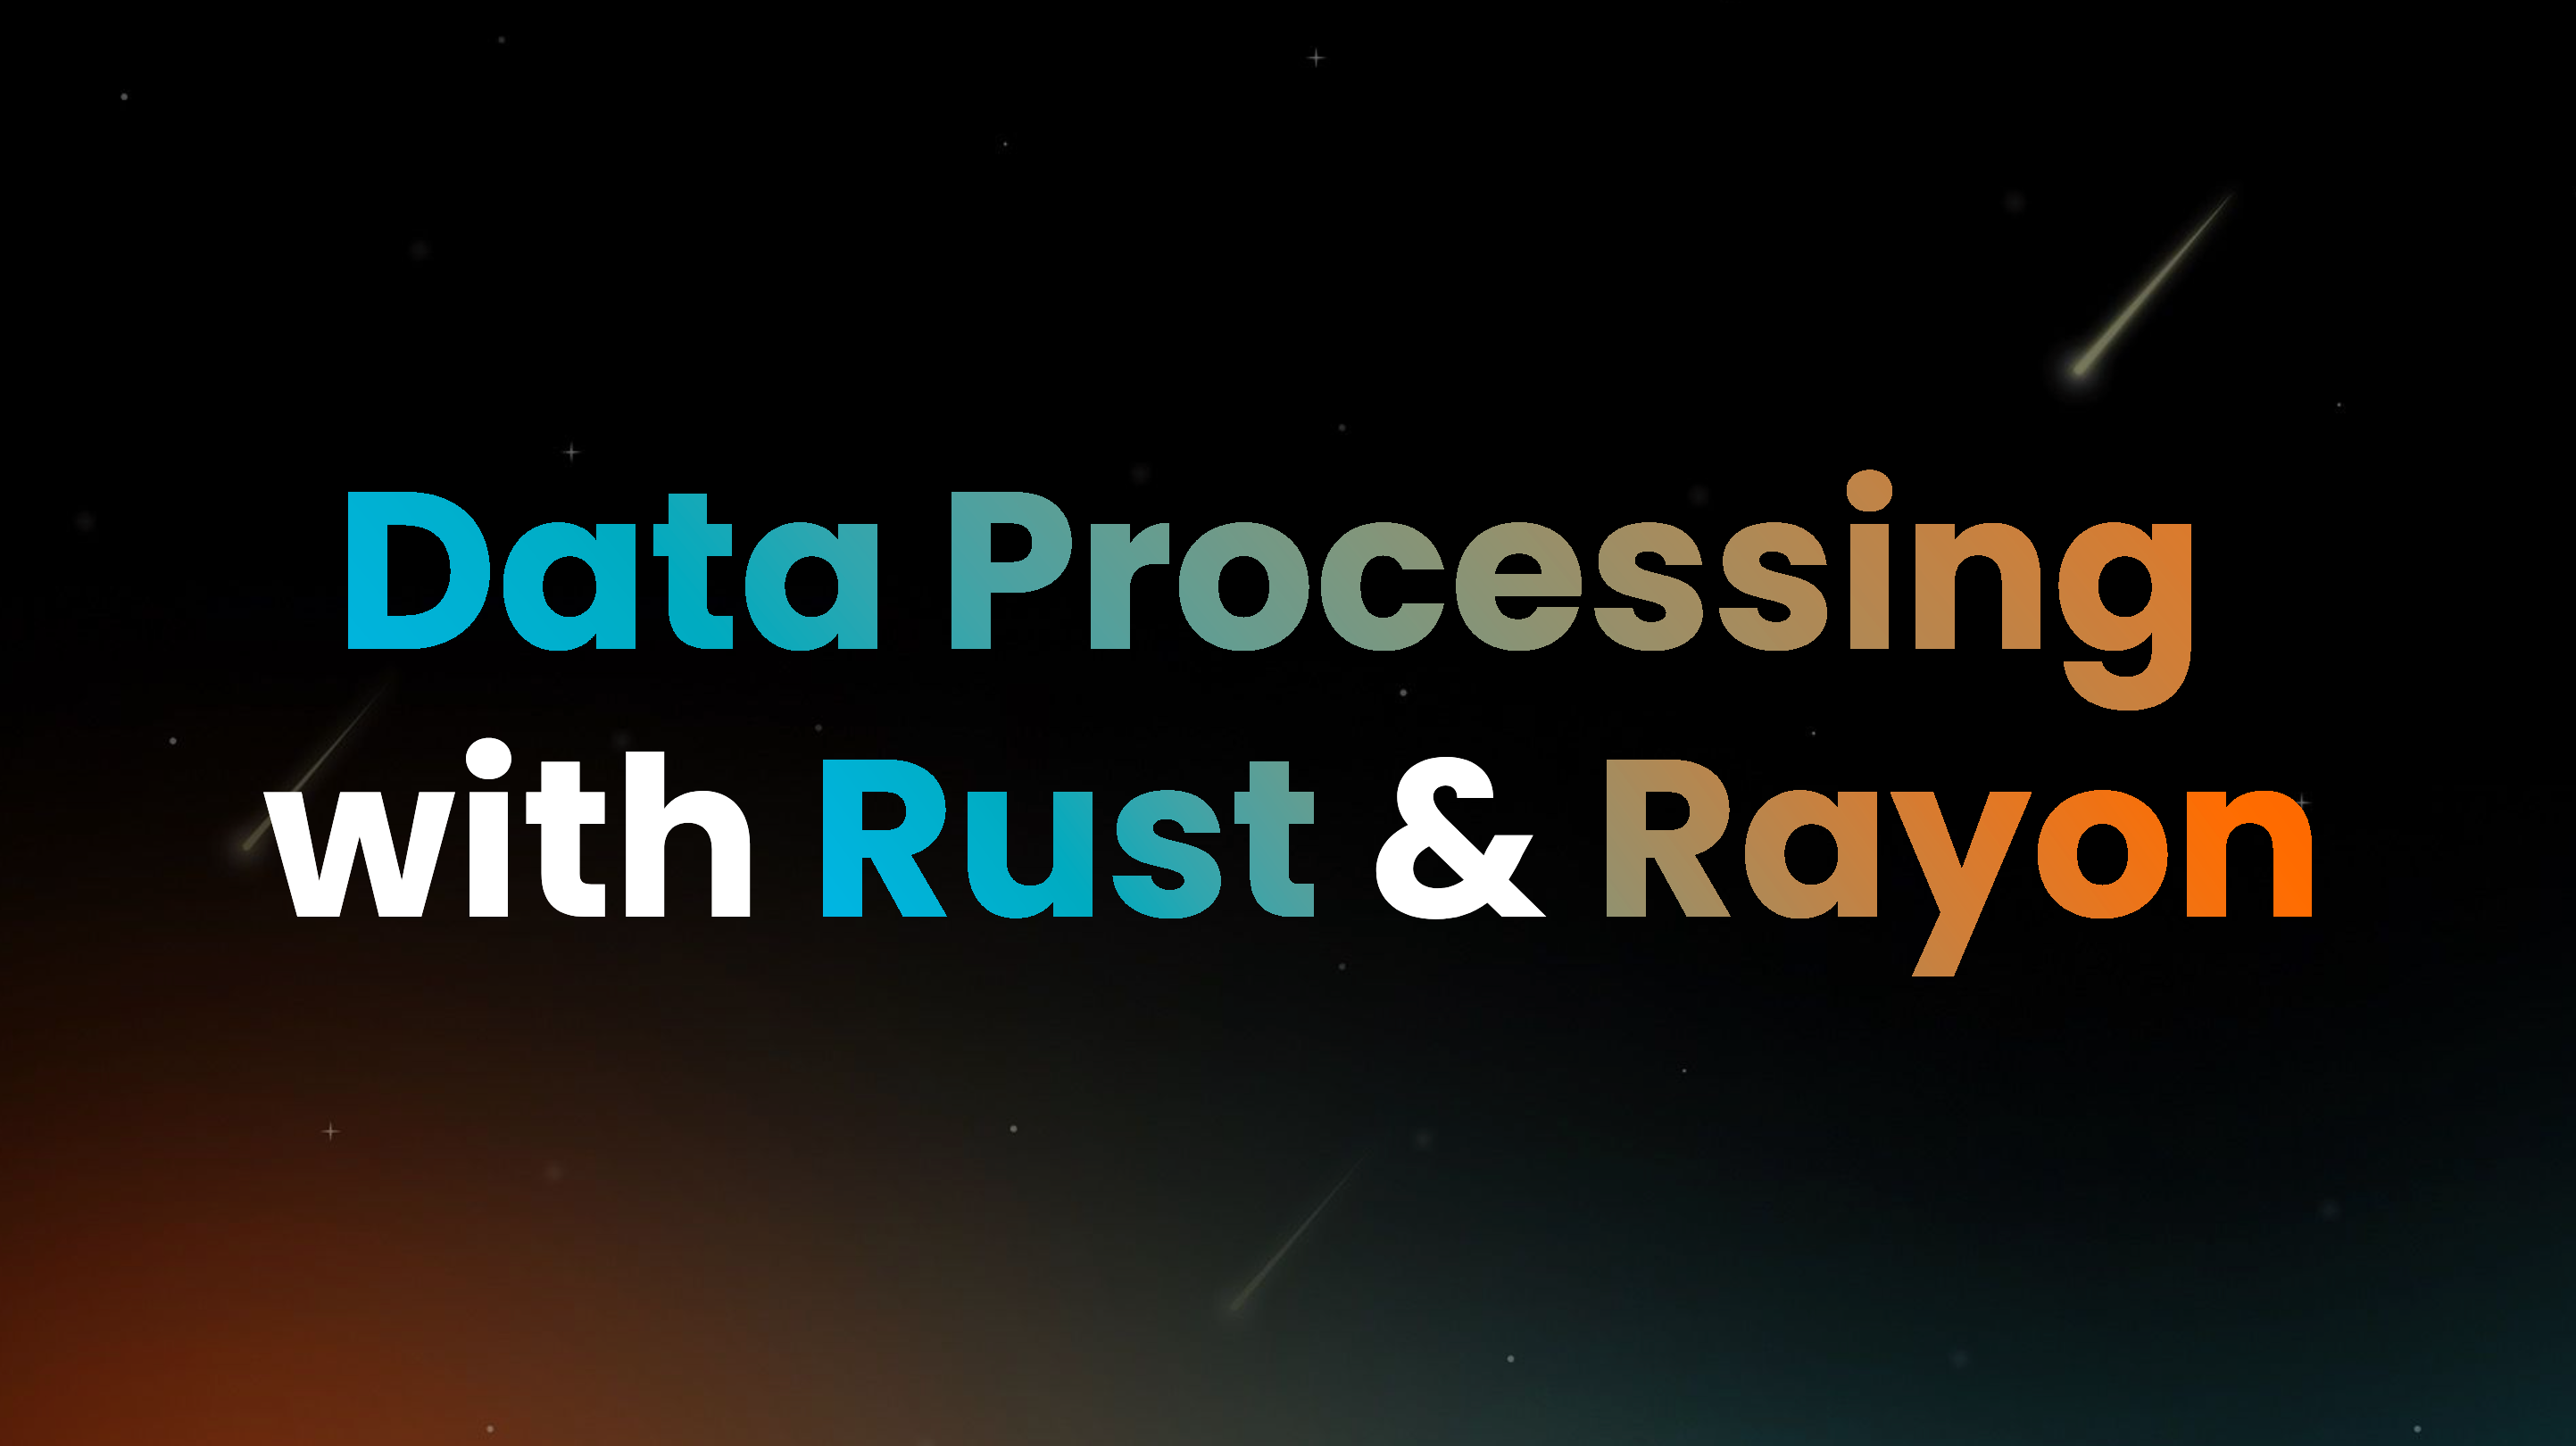 Data Parallelism with Rust and Rayon